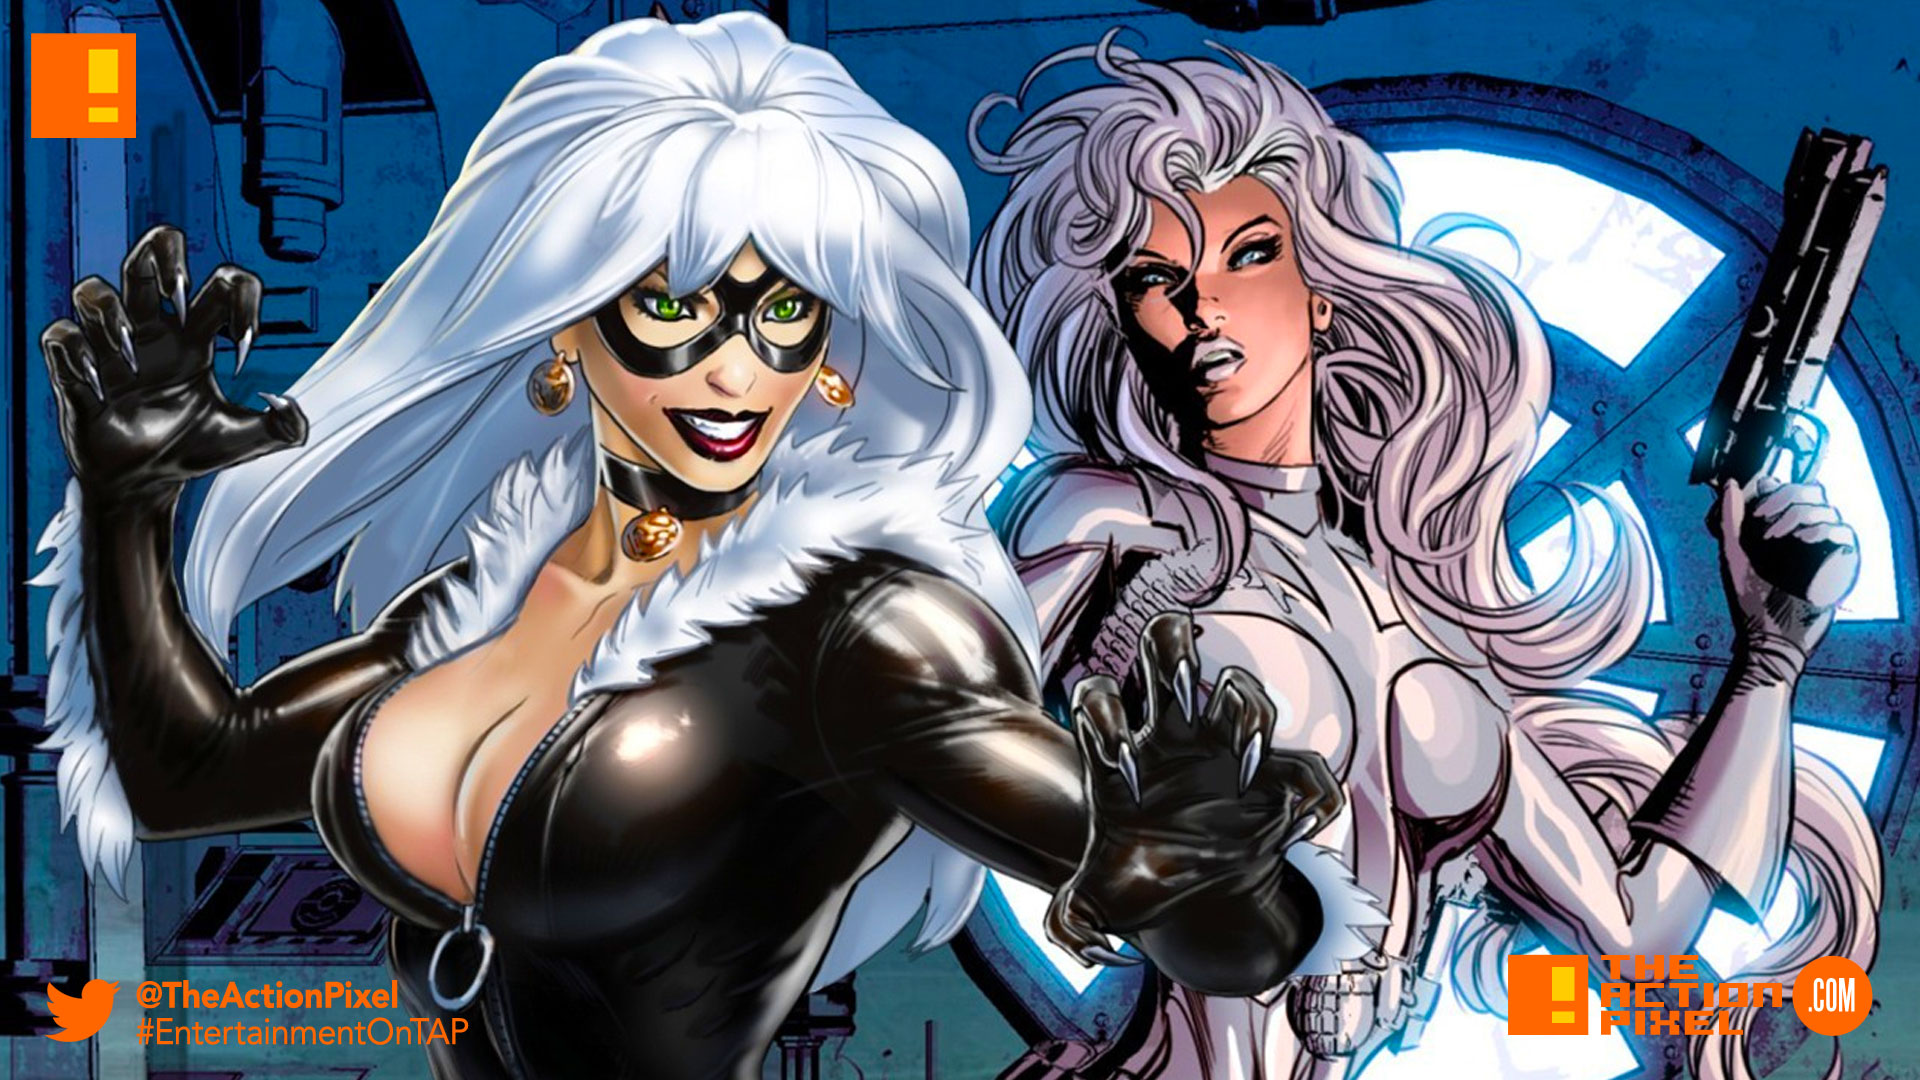 black cat, white sable, sony, marvel, marvel comics, spin-off, spider-man, the action pixel, entertainment on tap,